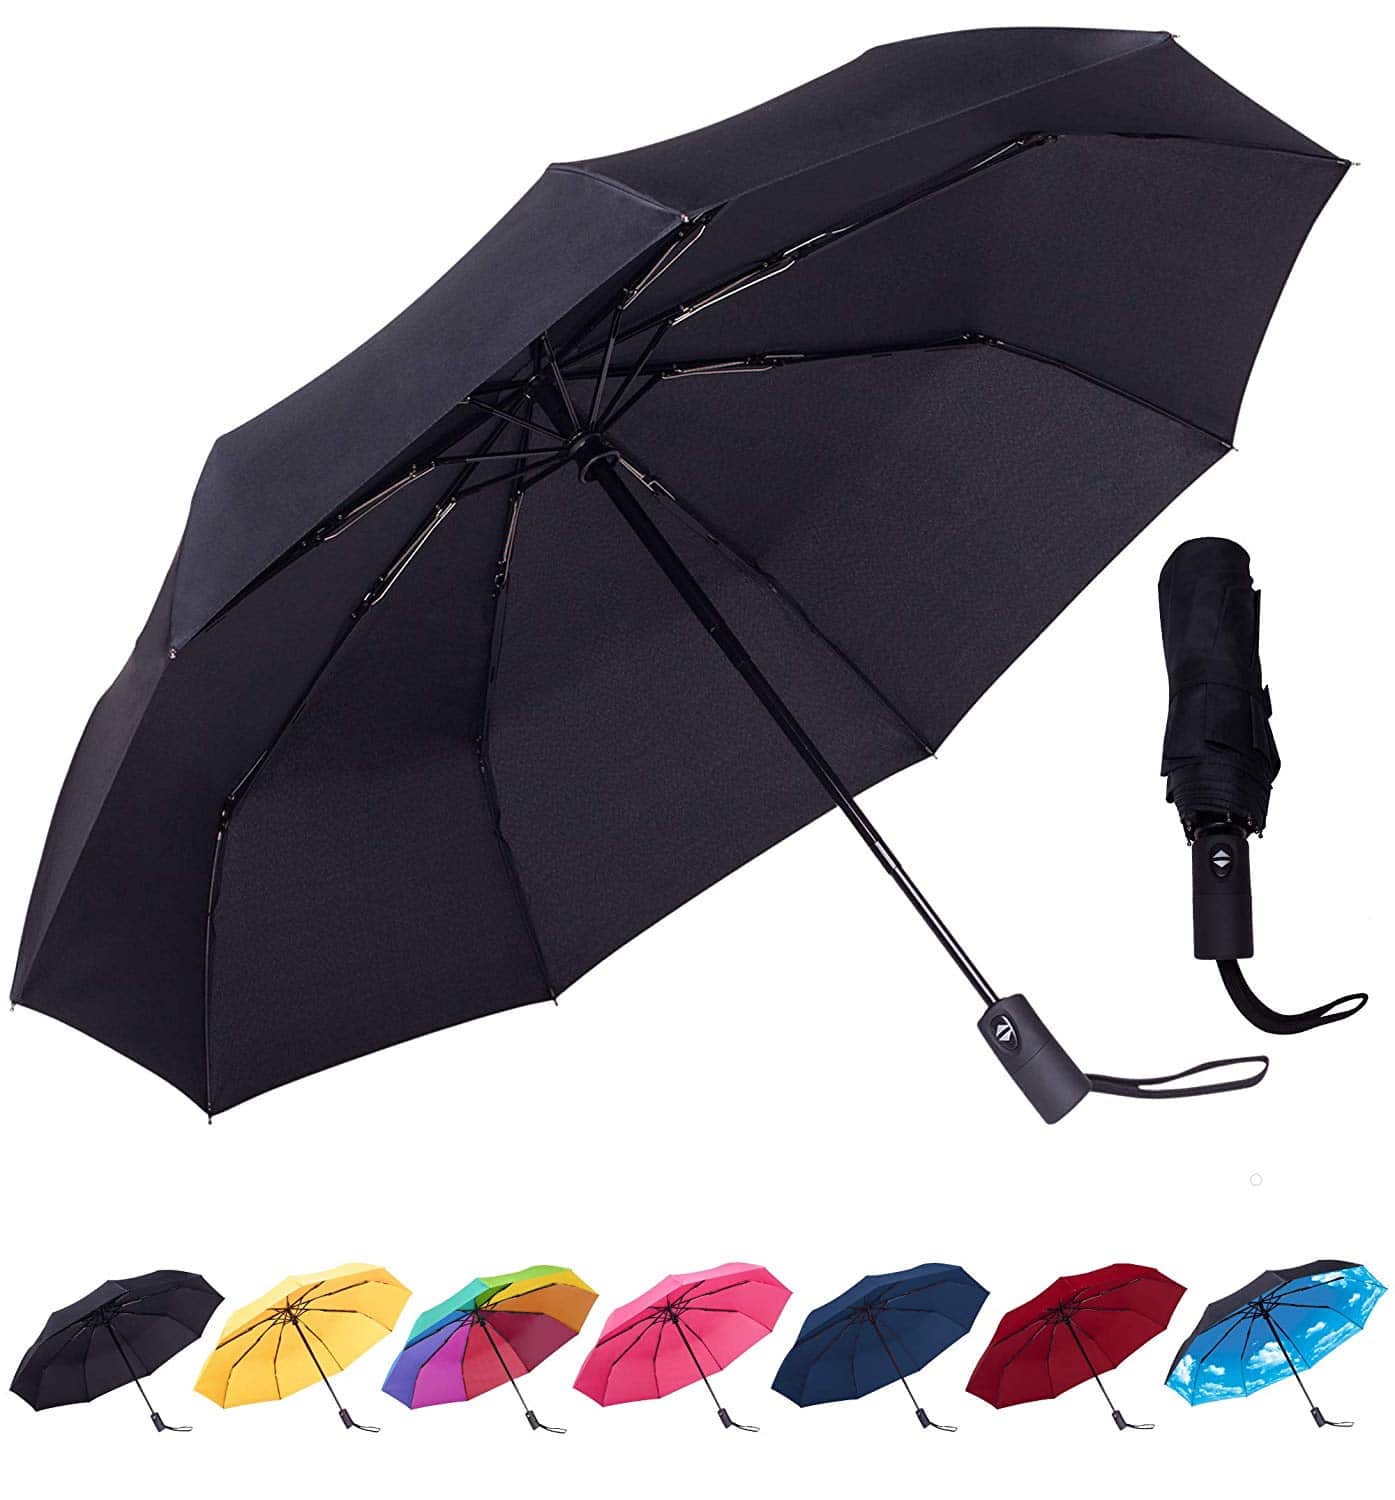 Top 10 Best Mini Umbrella for Travel in 2023 Complete Reviews